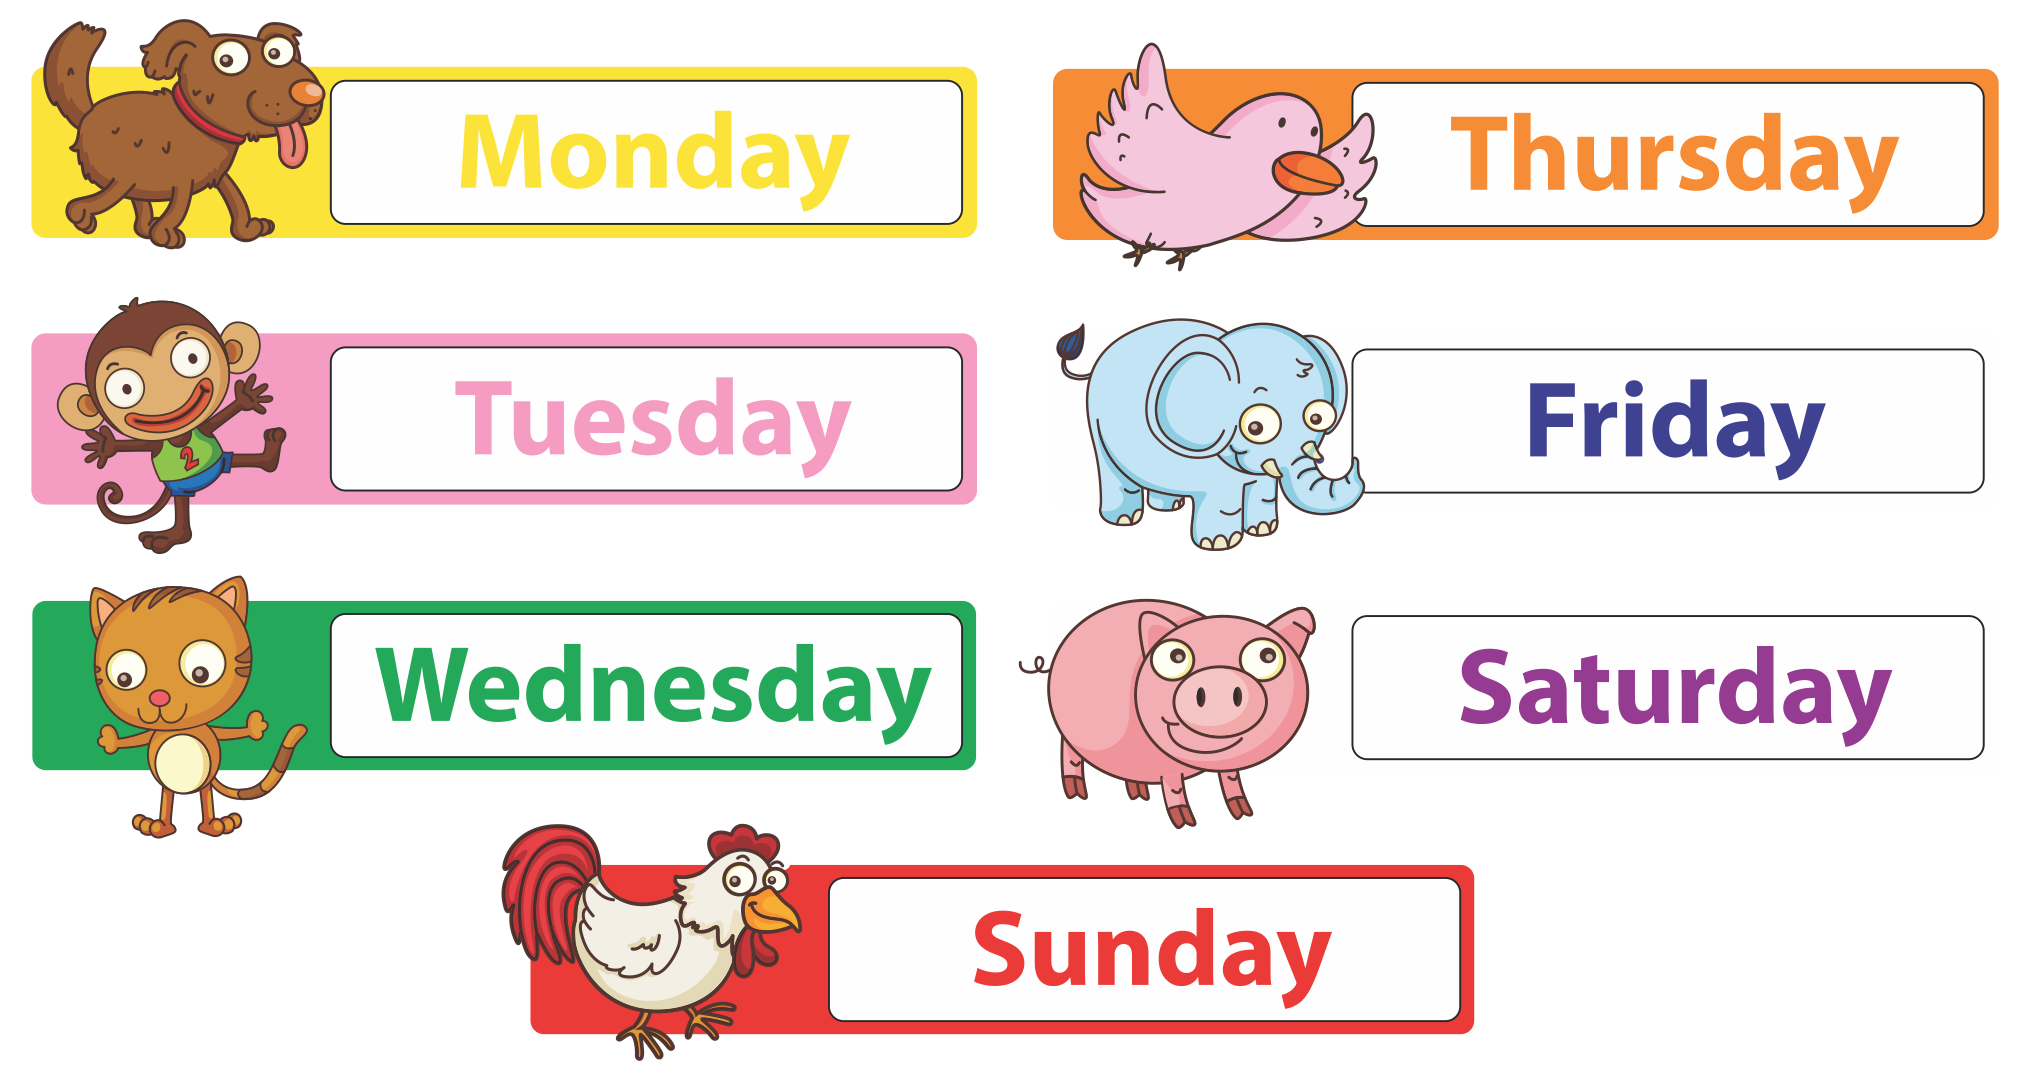 7-best-images-of-days-of-the-week-printable-calendar-blank-days-of-the-week-calendar-free